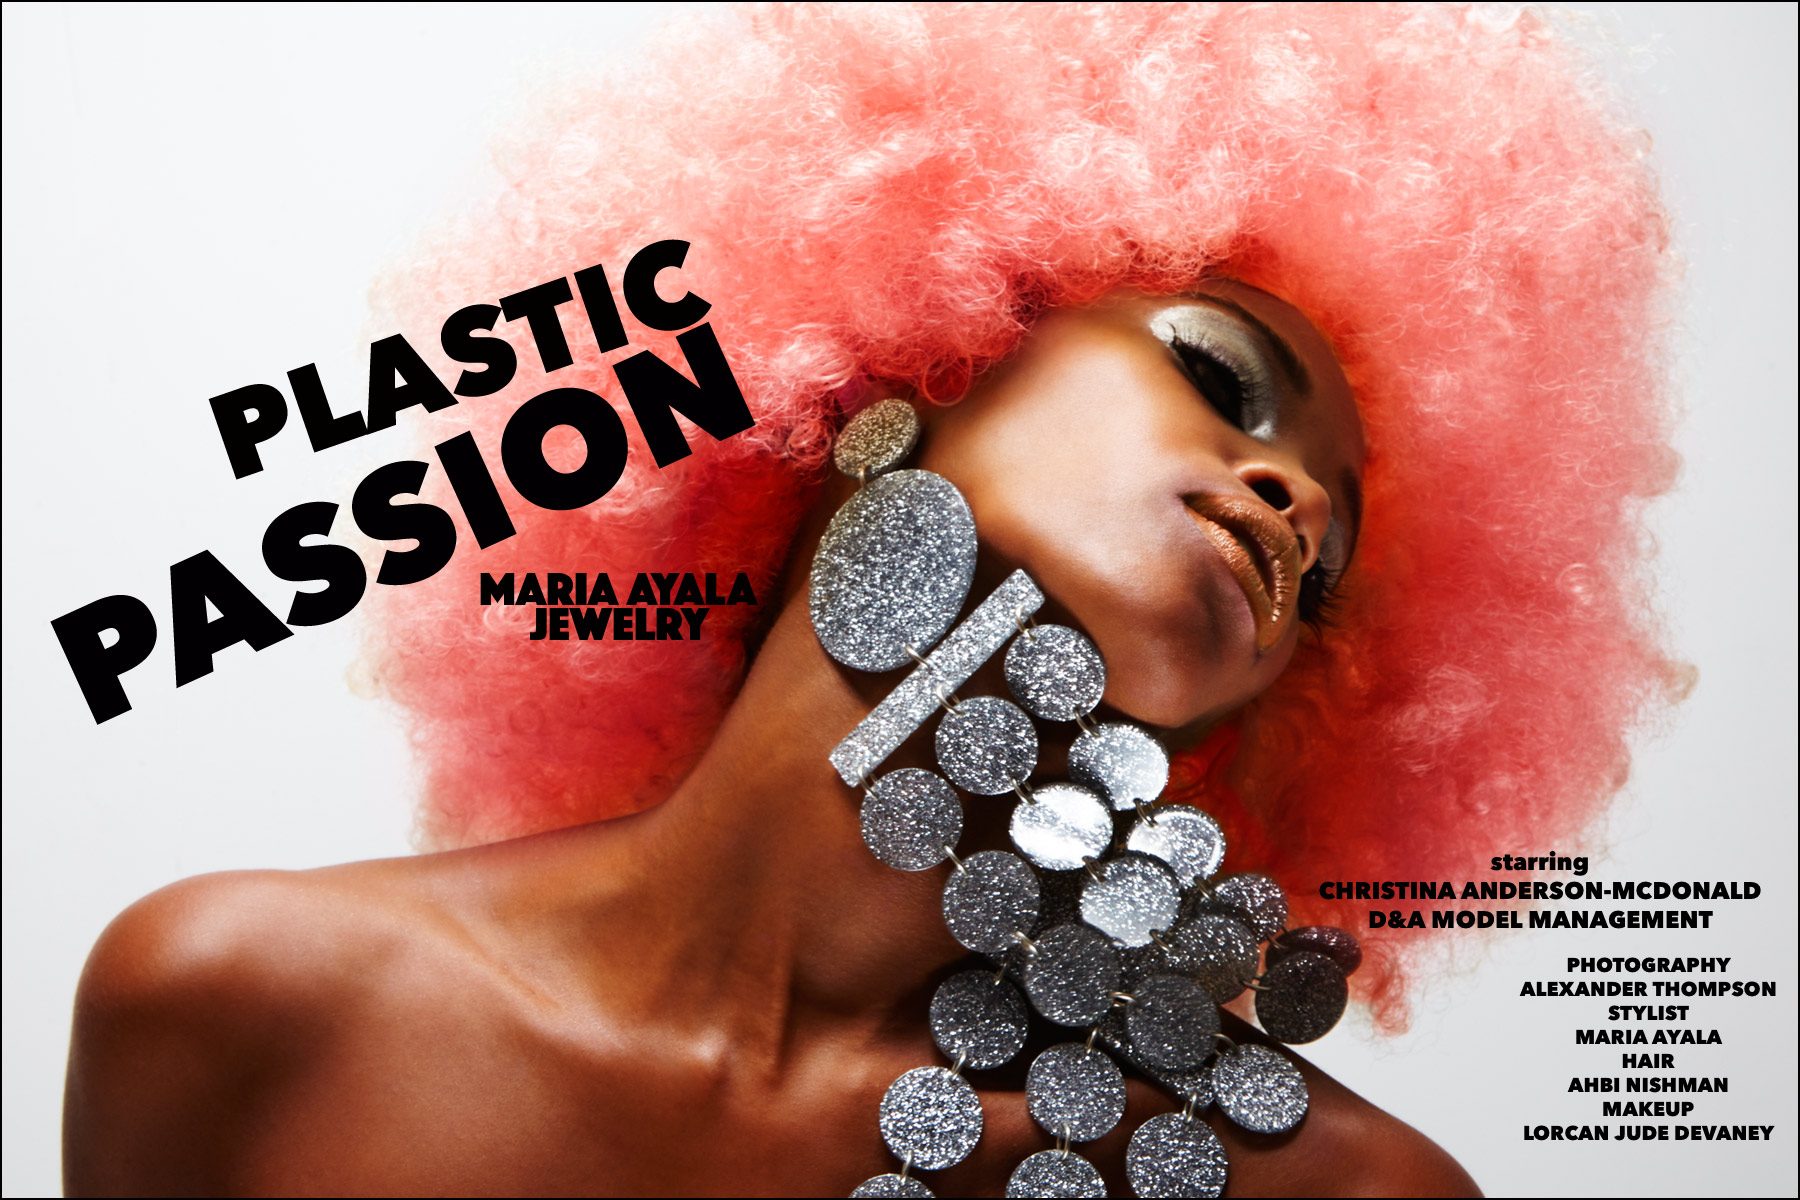 Plastic Passion, vintage Maria Ayala plastic jewelry, featured on model Christina Anderson-McDonald. Photographed by Alexander Thompson for Ponyboy magazine.